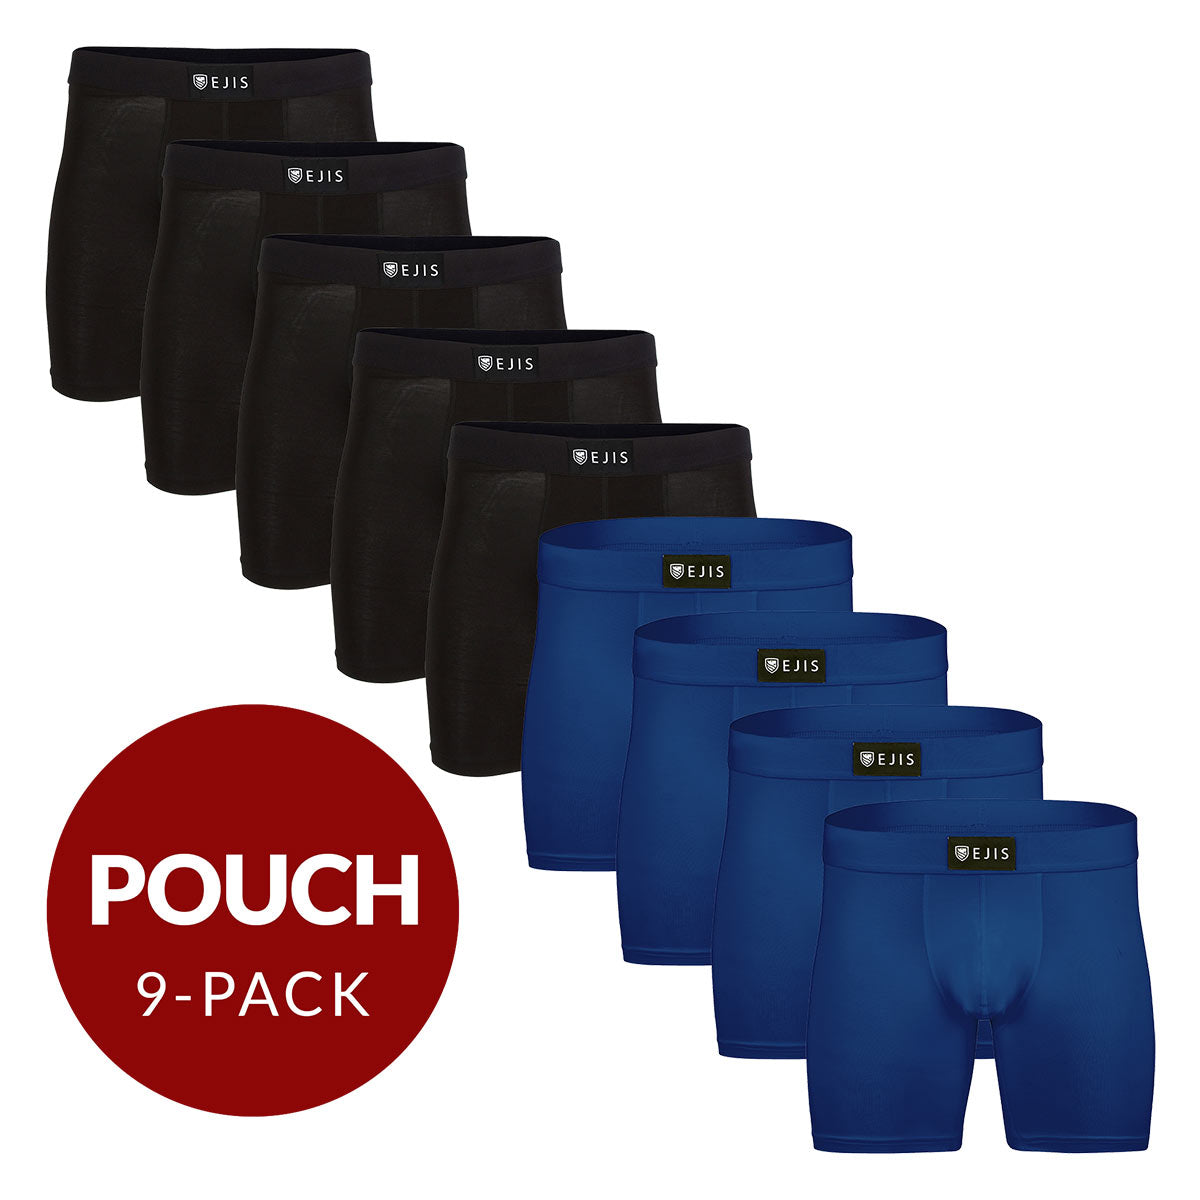 Sweat Proof Men's Boxer Briefs with Pouch - Mix 9-Pack (5x Black, 4x Navy) - Ejis